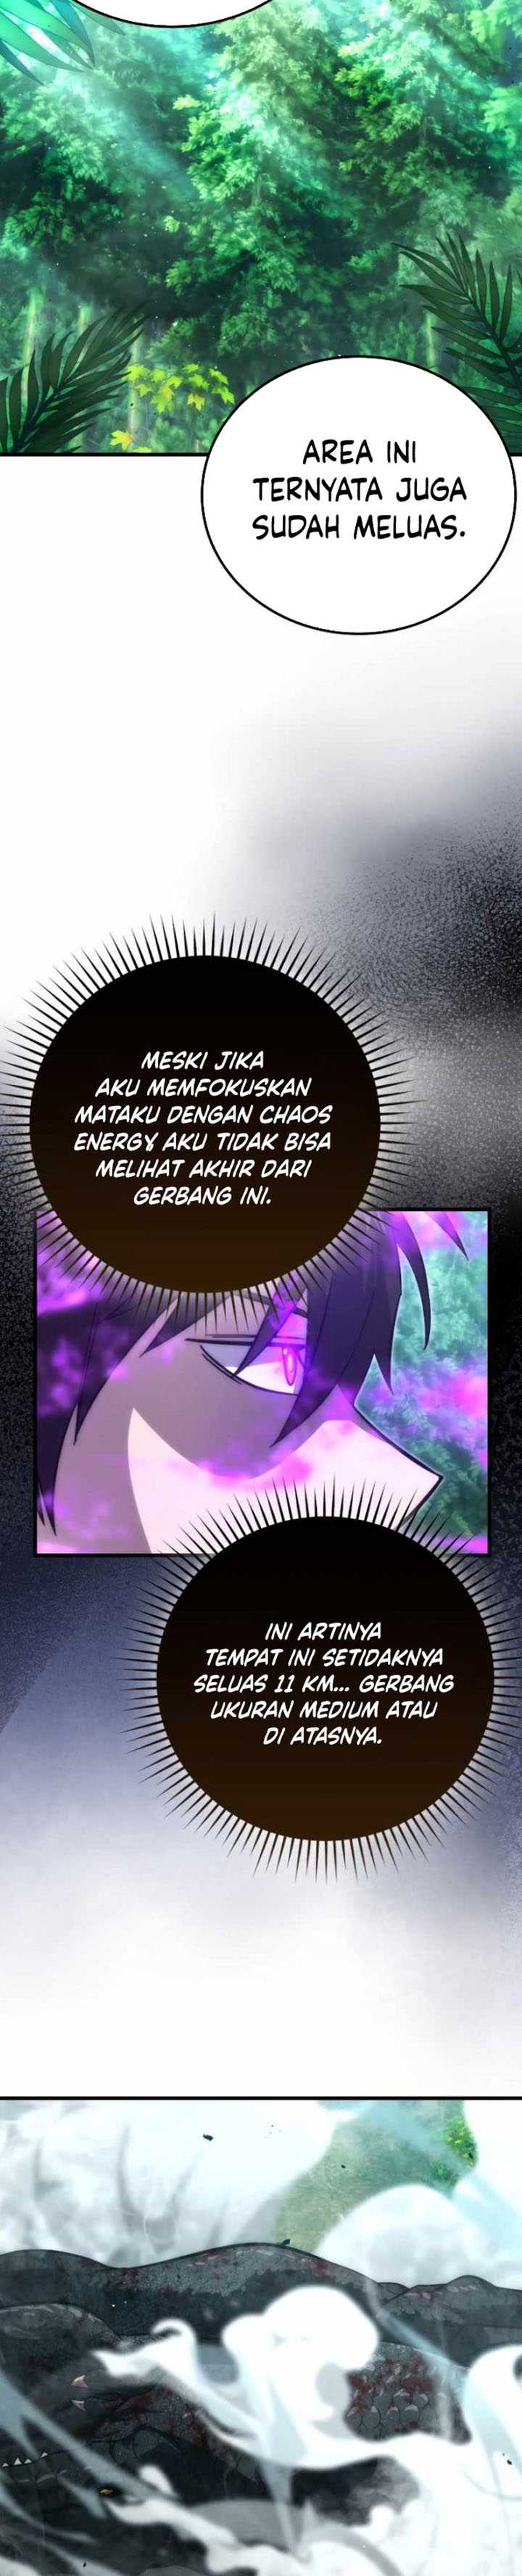 Demon Lord’s Martial Arts Ascension Chapter 56